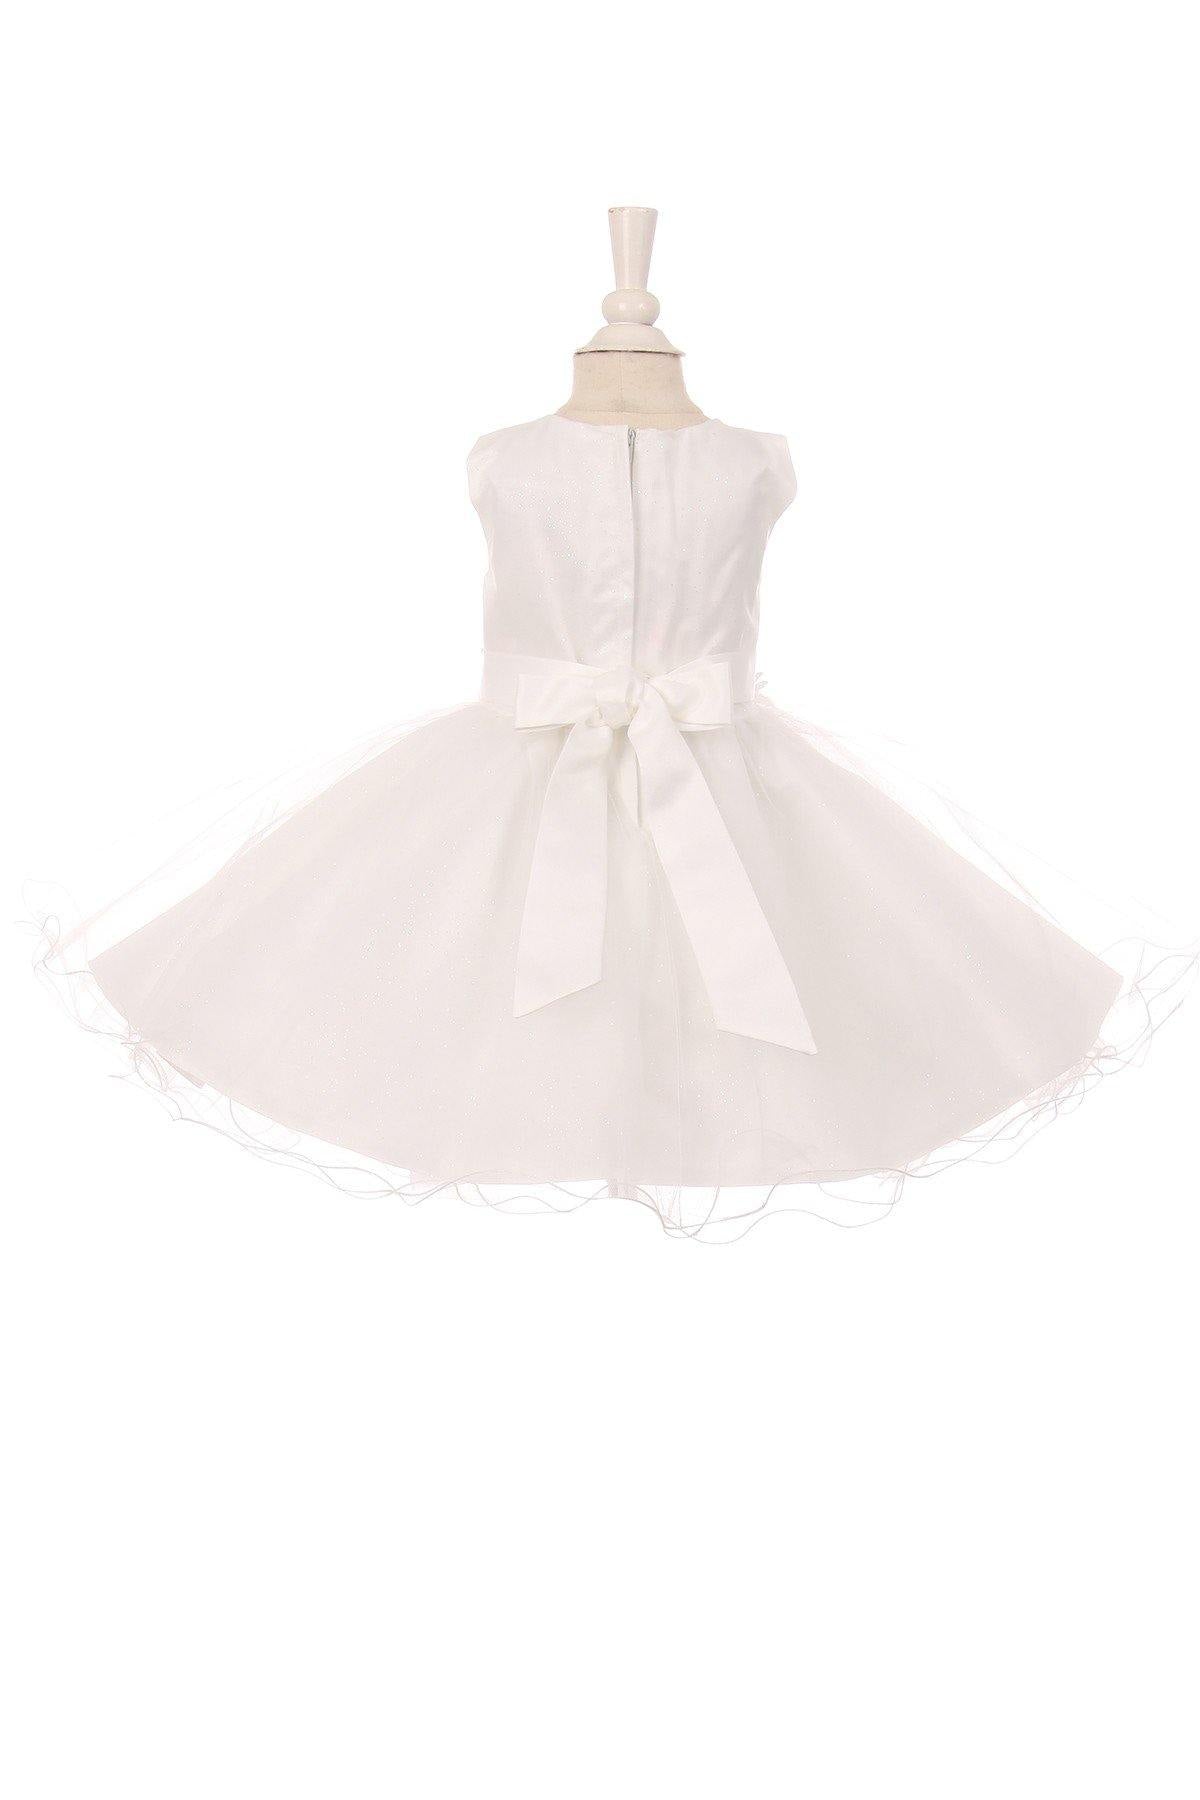 Sleeveless Embroidered Design Flower Girls Dress - The Dress Outlet Cinderella Couture